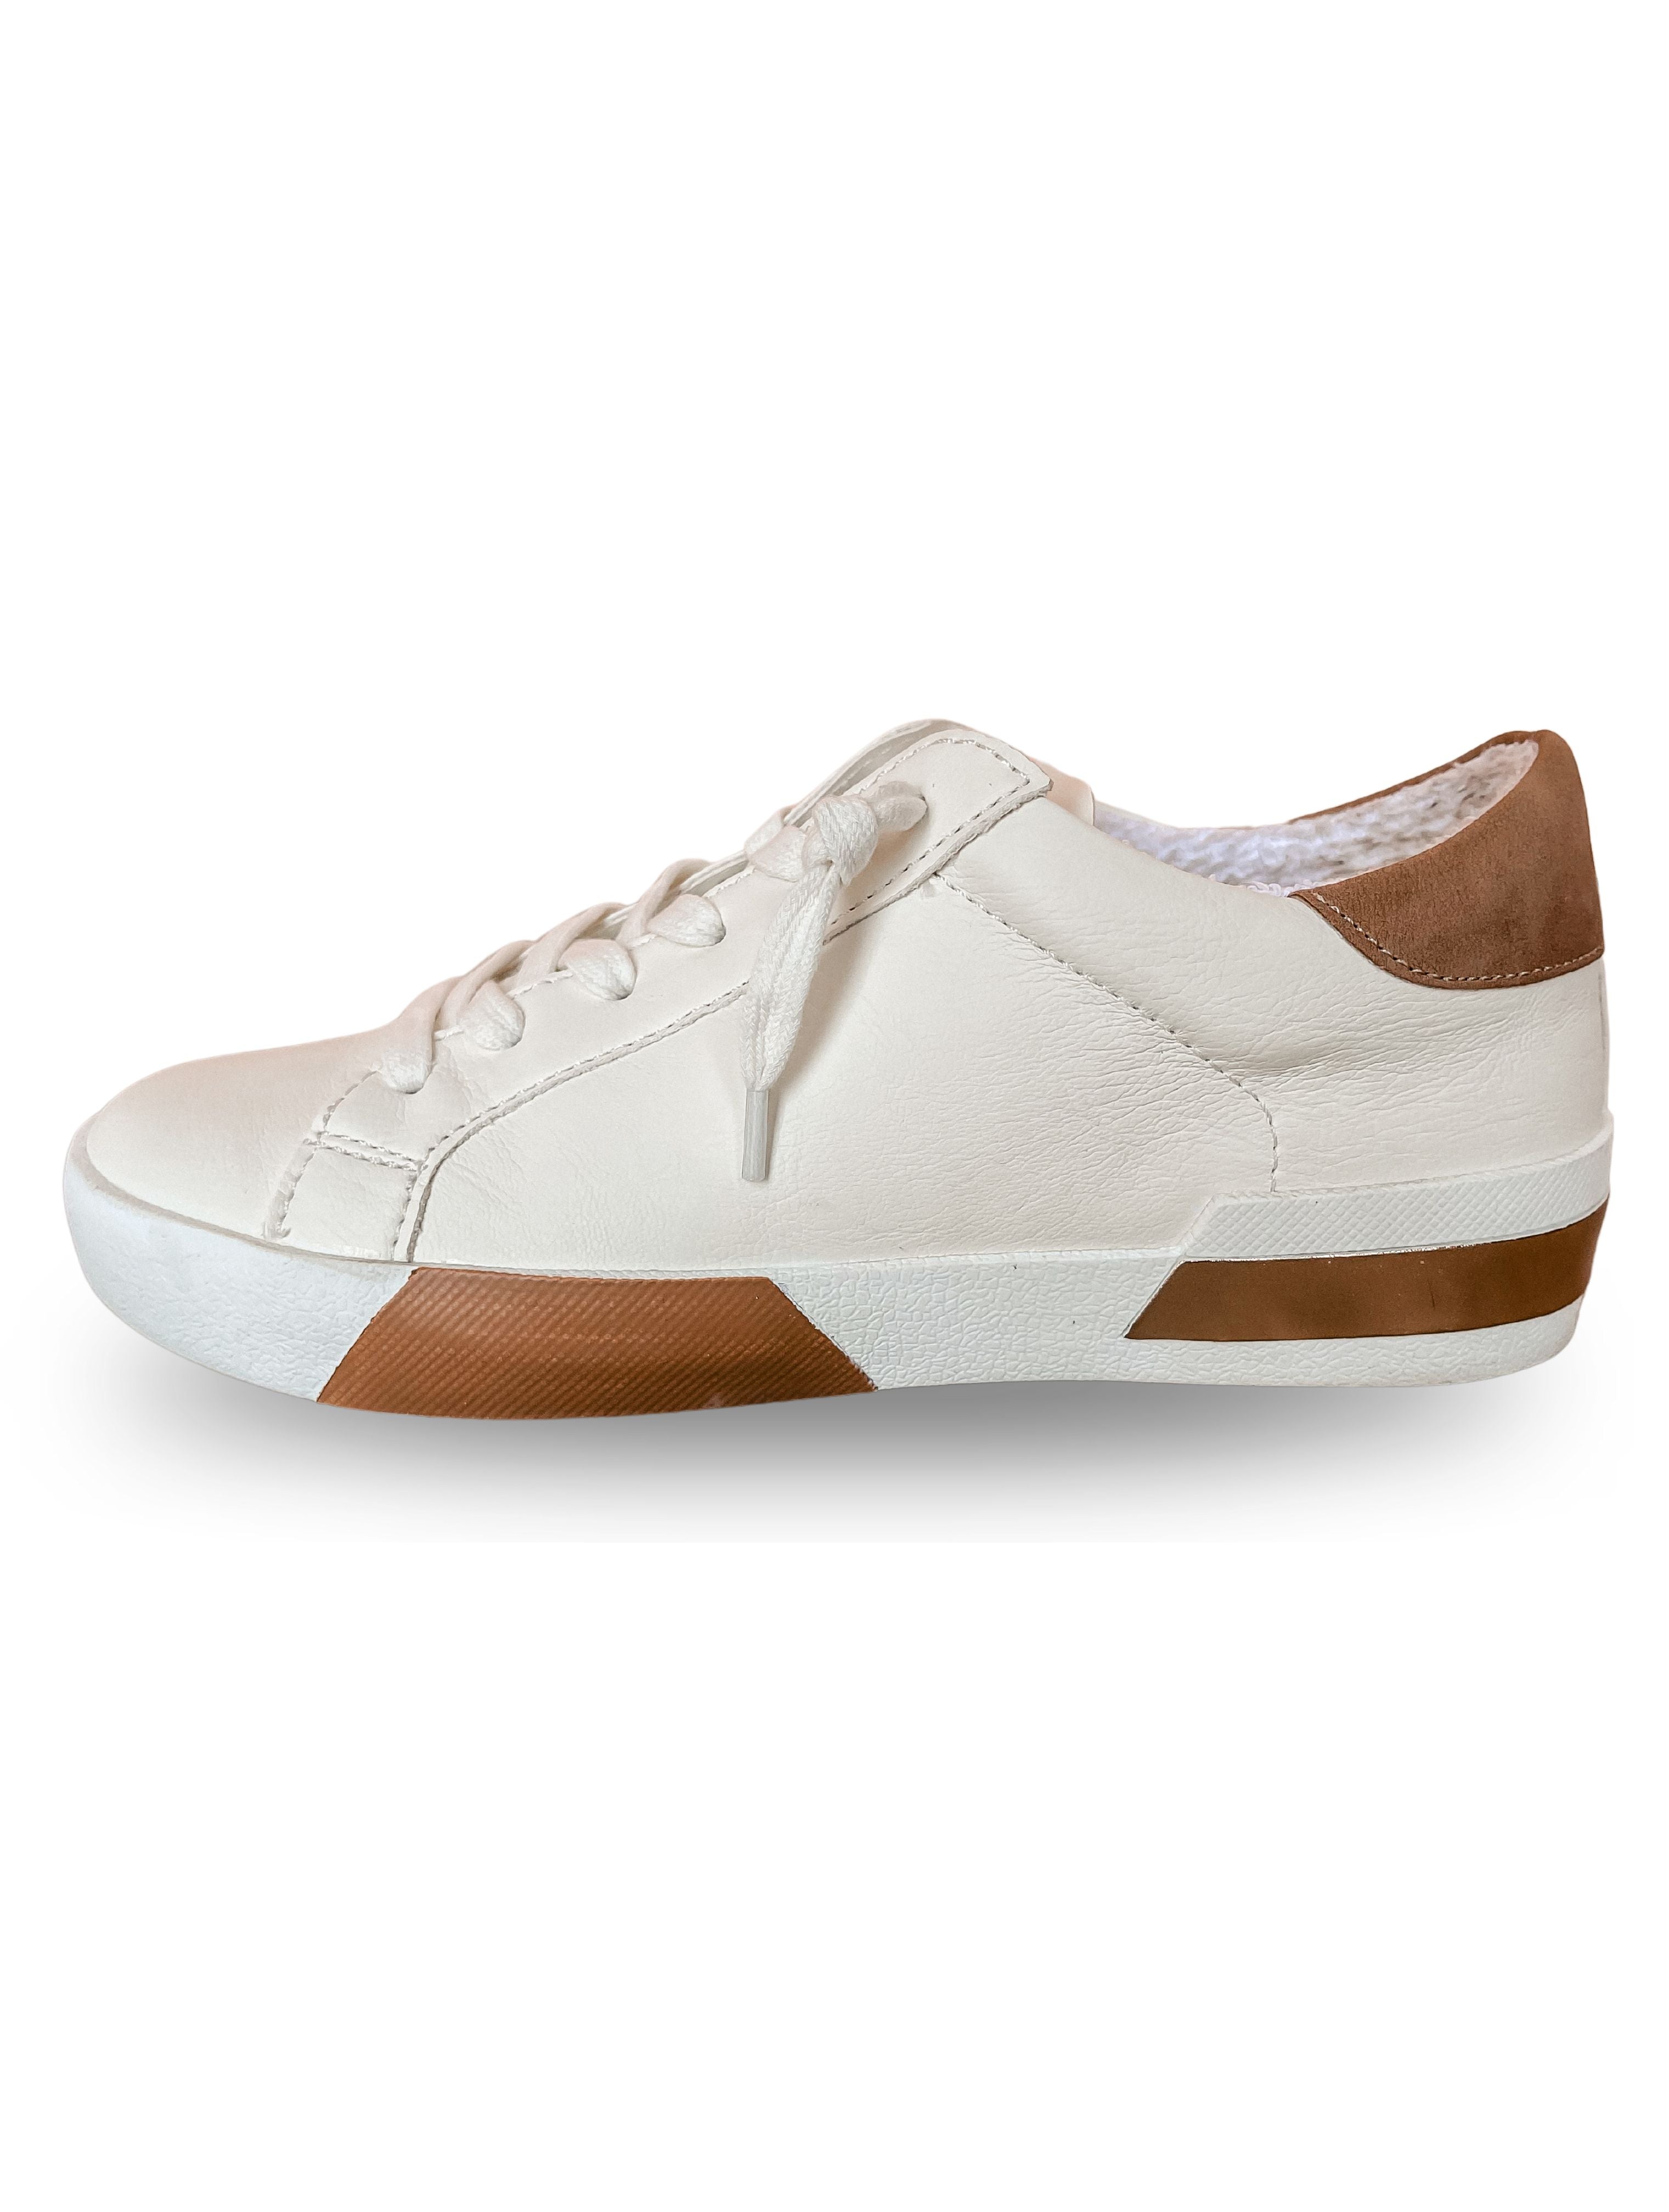 Zion Sneaker-Nude/Rose Gold